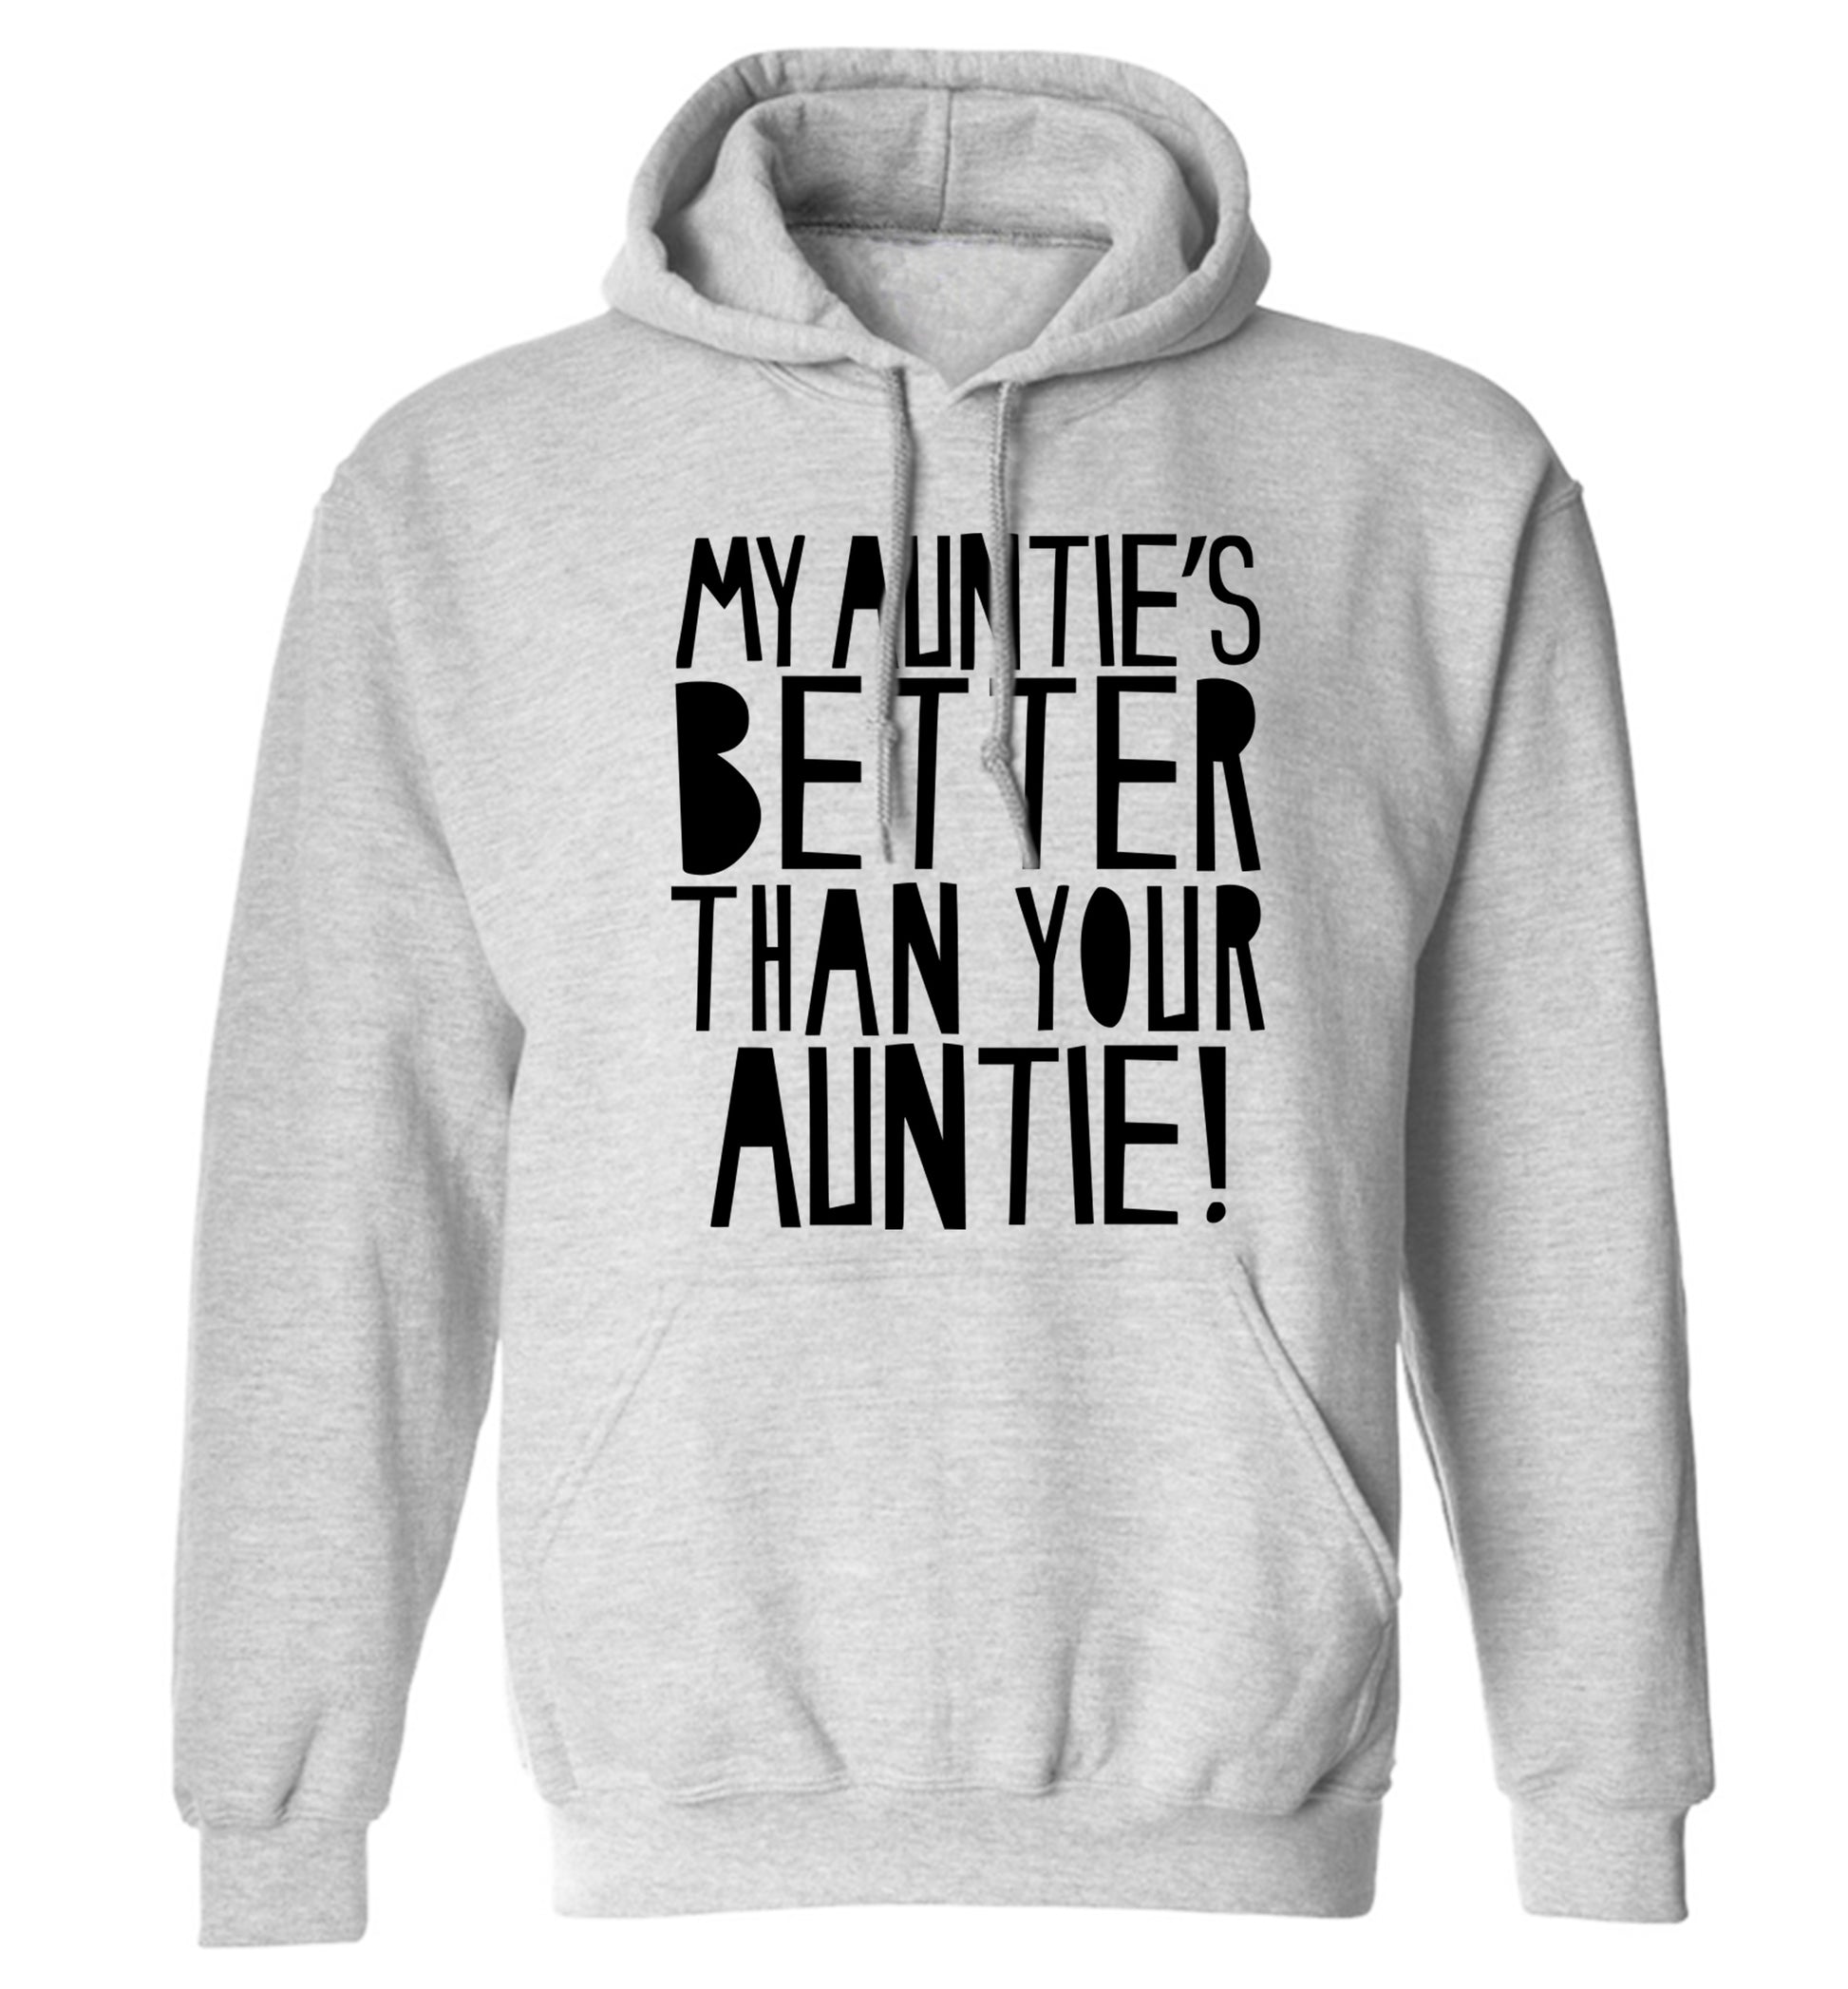 My auntie's better than your auntie adults unisex grey hoodie 2XL